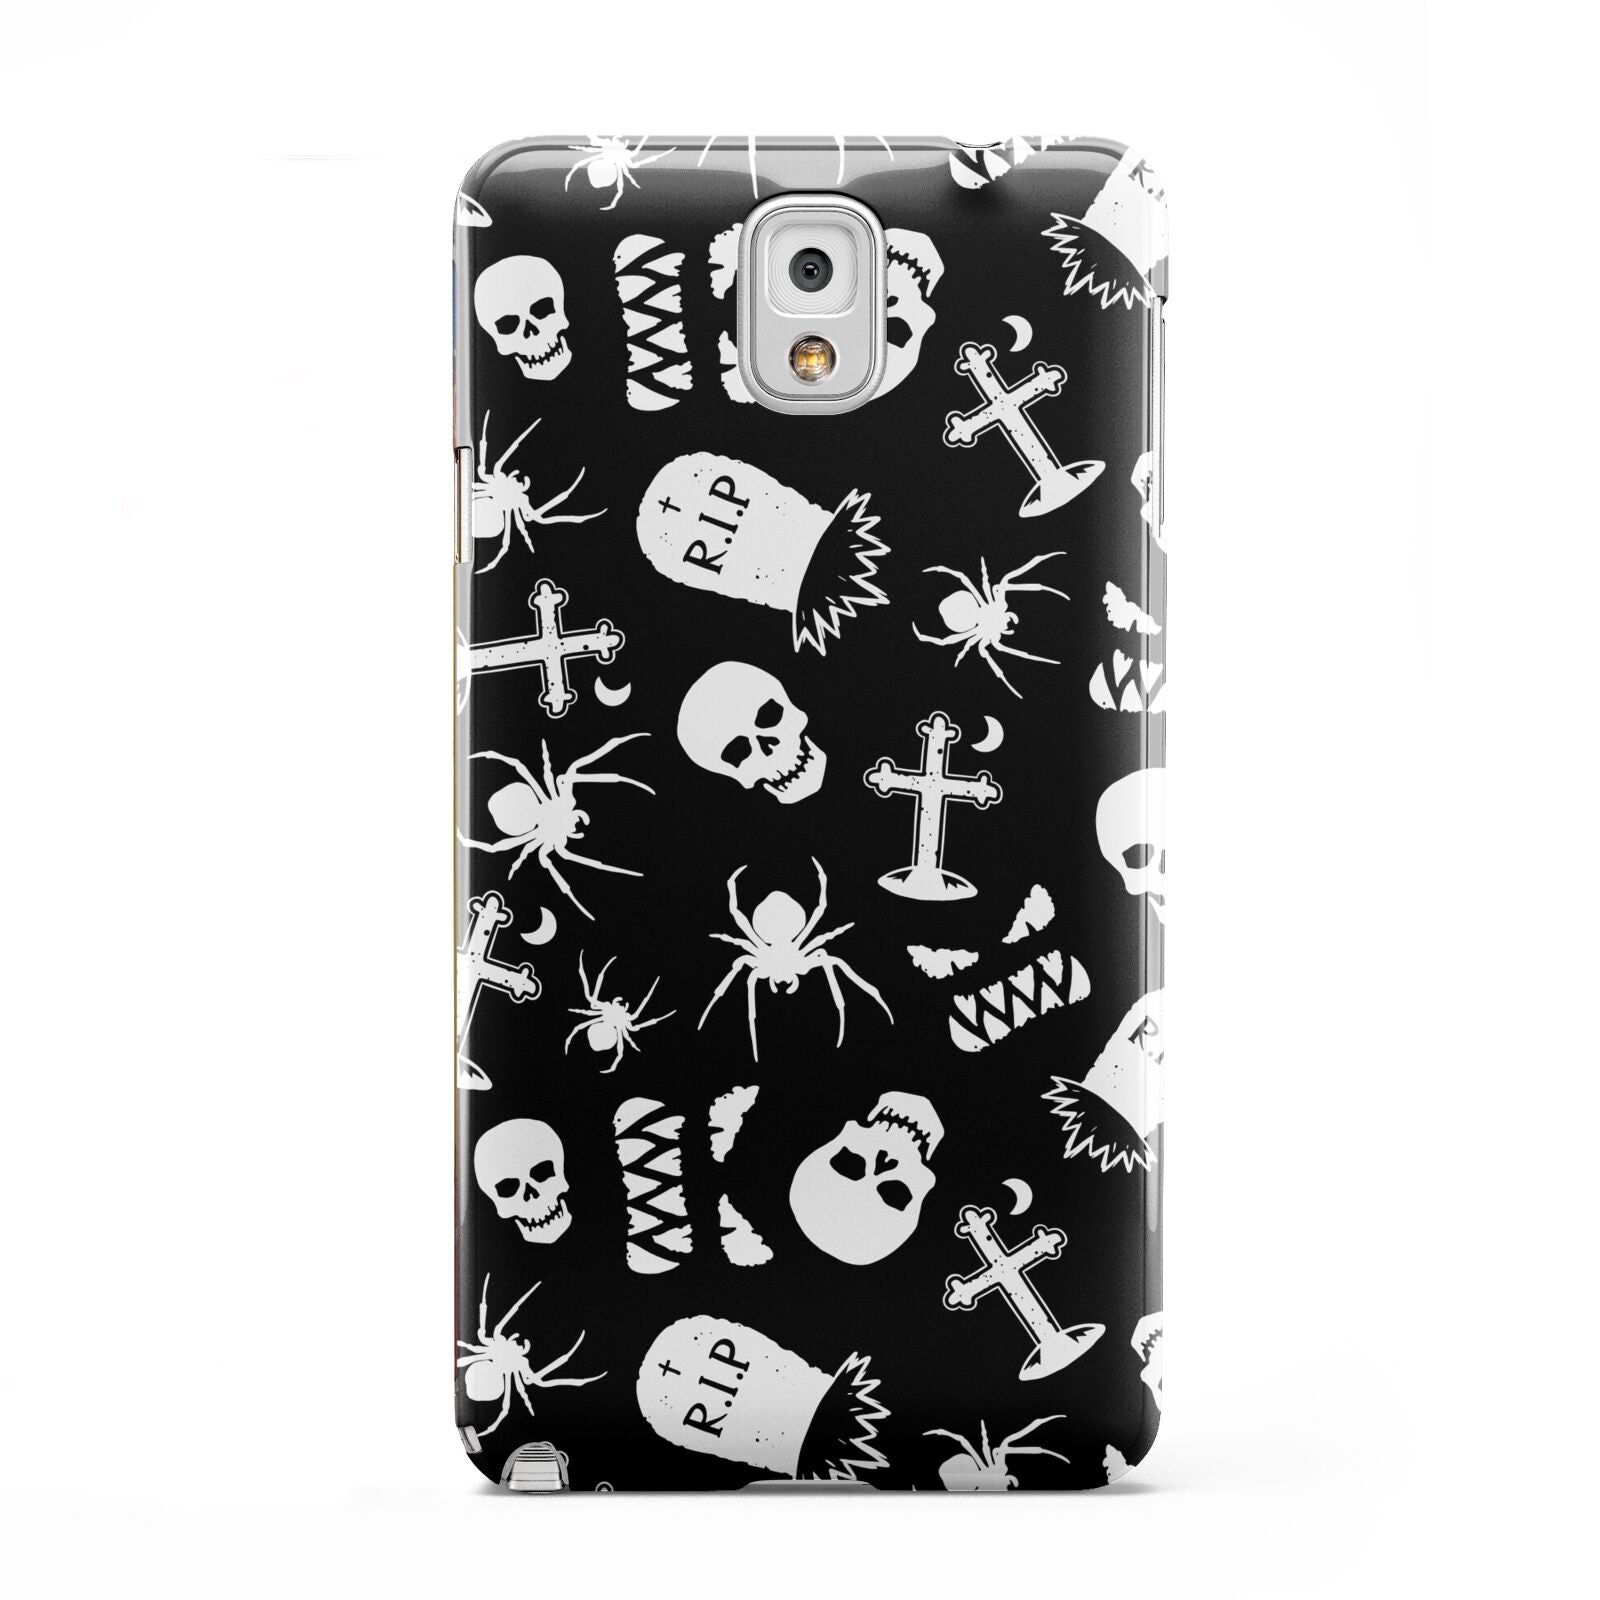 Spooky Illustrations Samsung Galaxy Note 3 Case